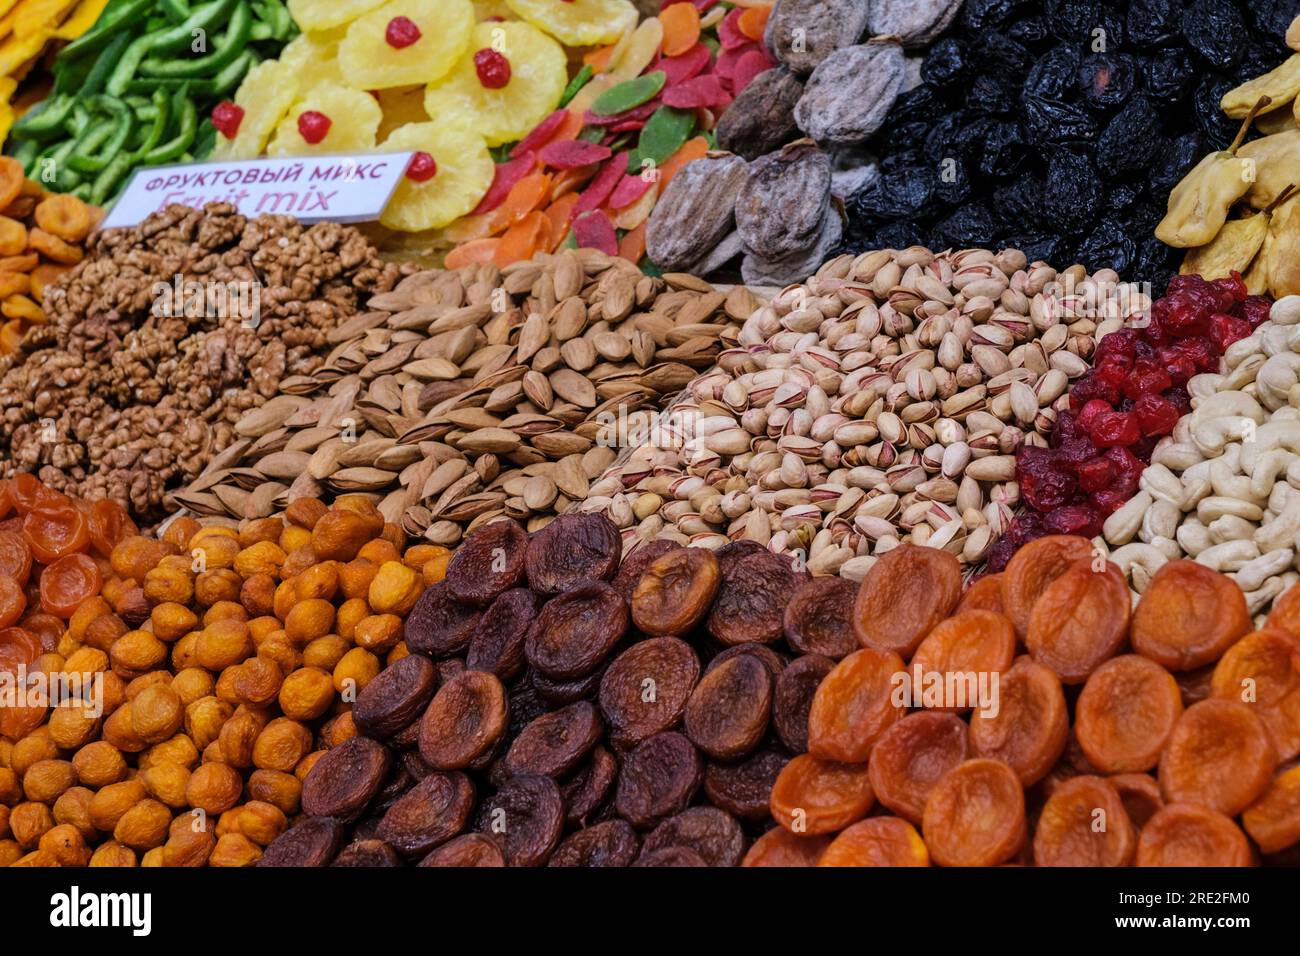 Kazakhstan, Almaty. Dried Fruits and Nuts in the Green Bazaar. Stock Photo